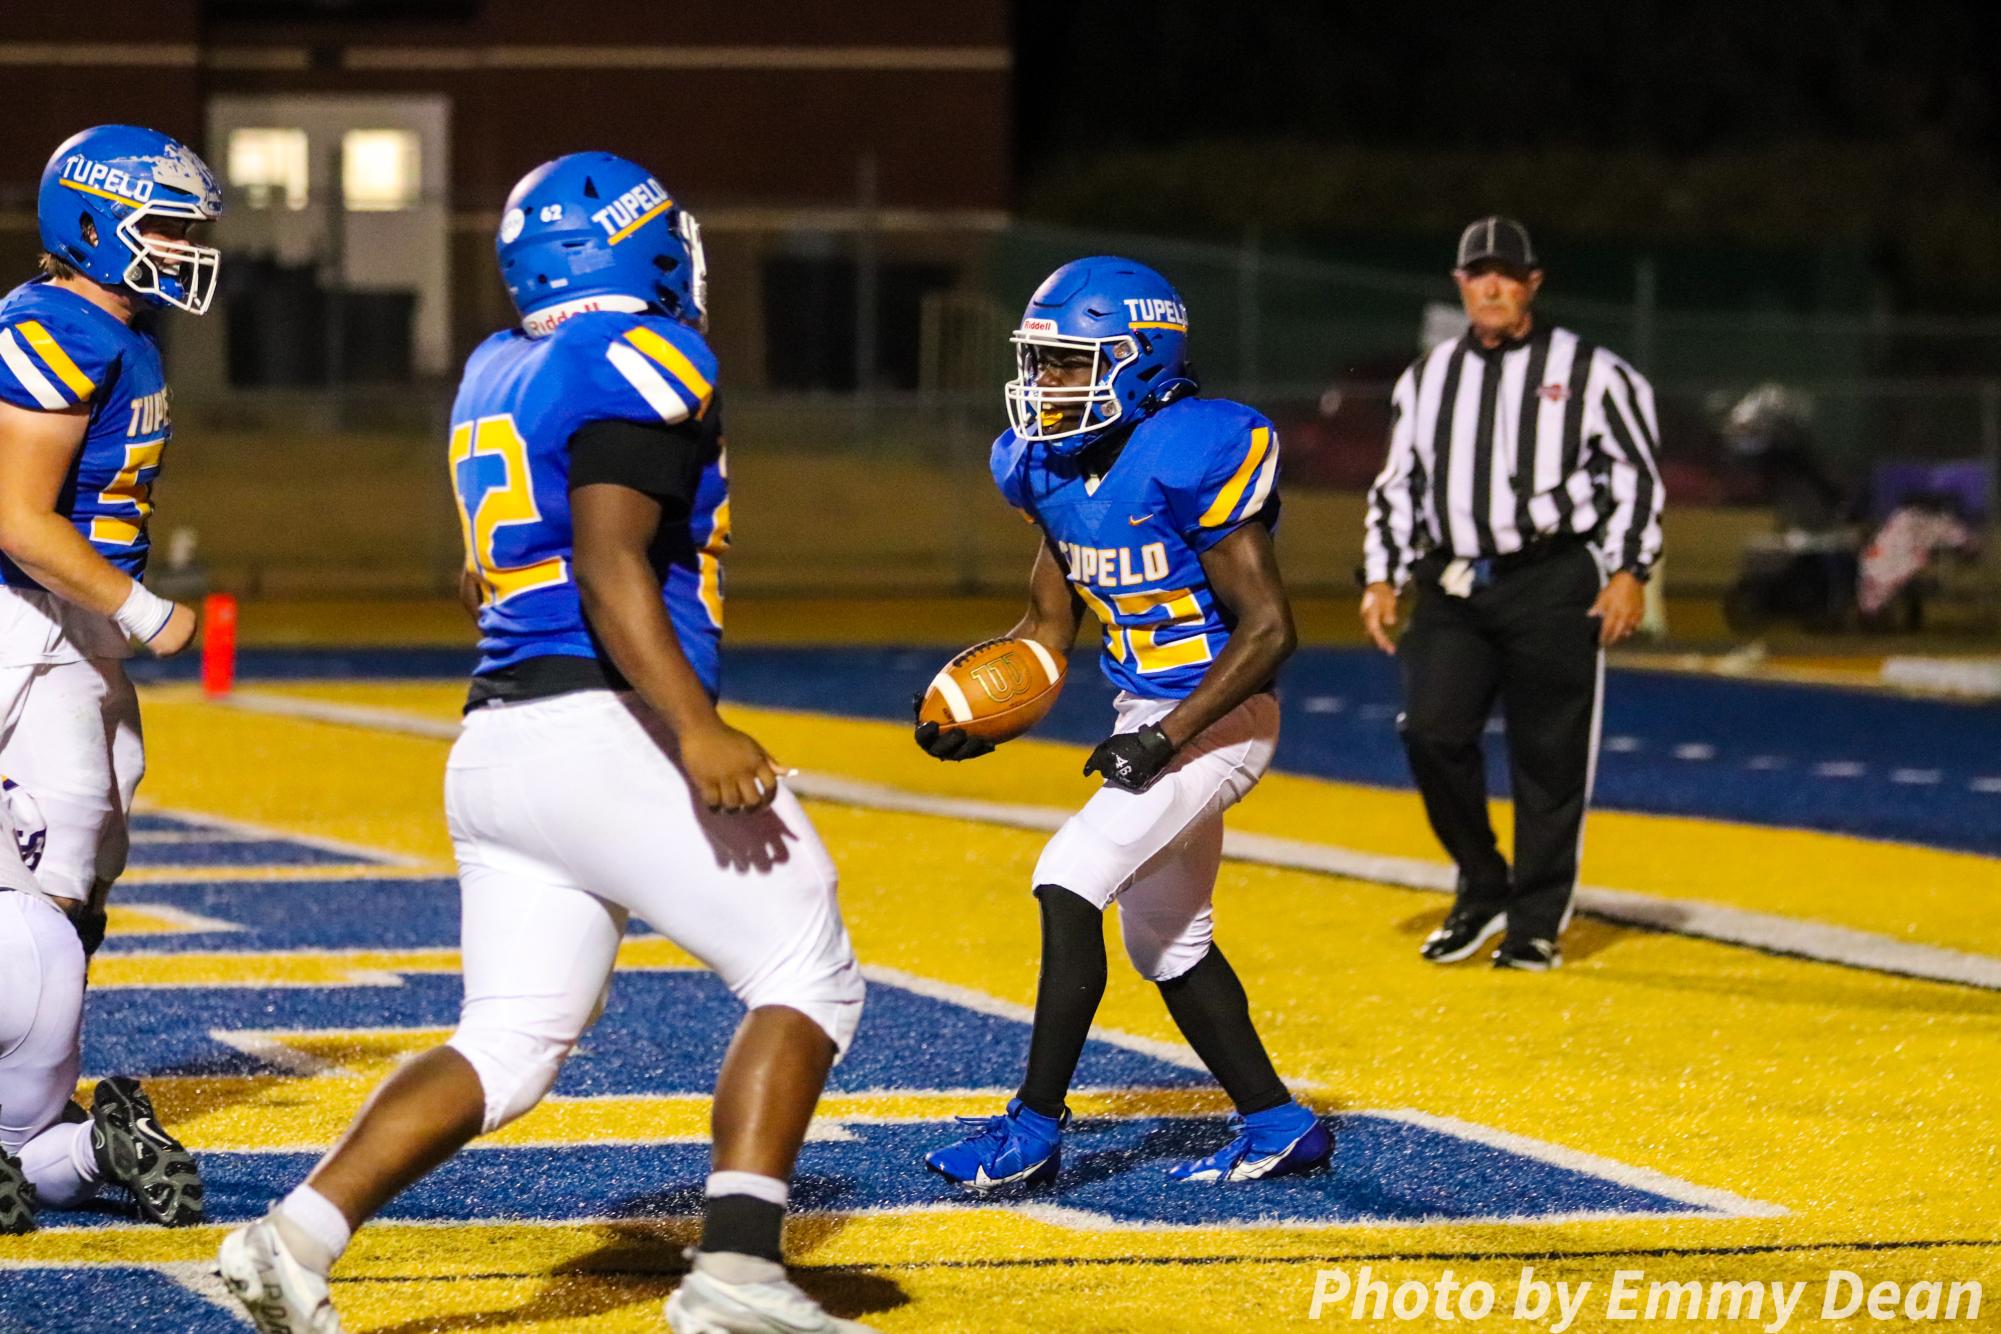 Tupelo+kicks+off+playoffs+with+win+against+Desoto+Central